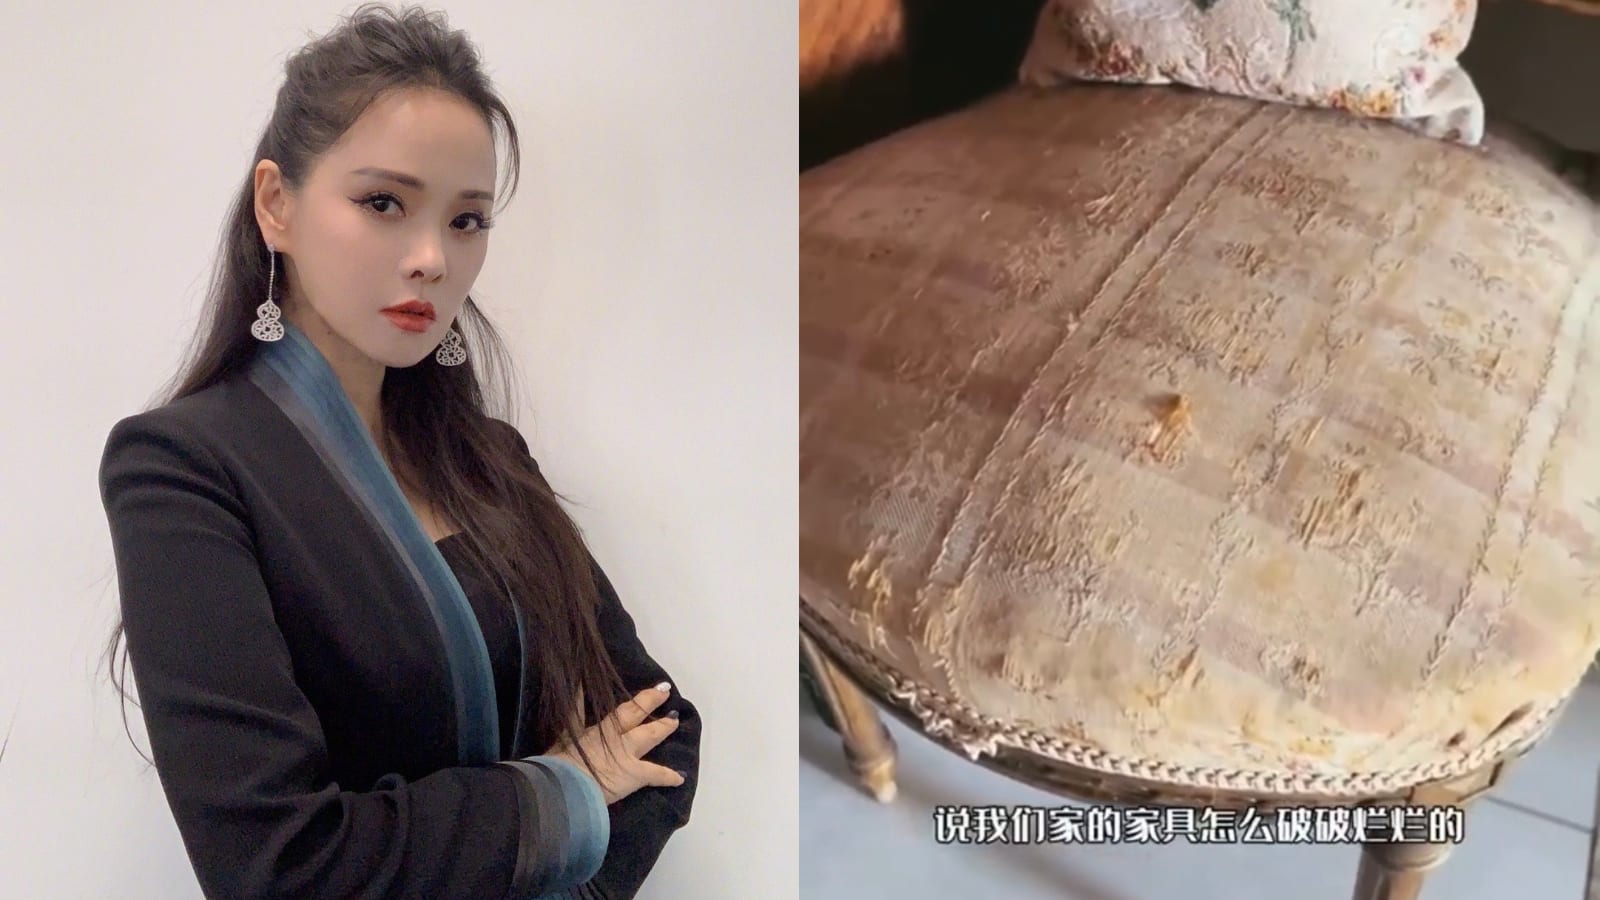 Annie Yi Explains Why The Furniture In Her Beijing Home Looks So “Tattered”